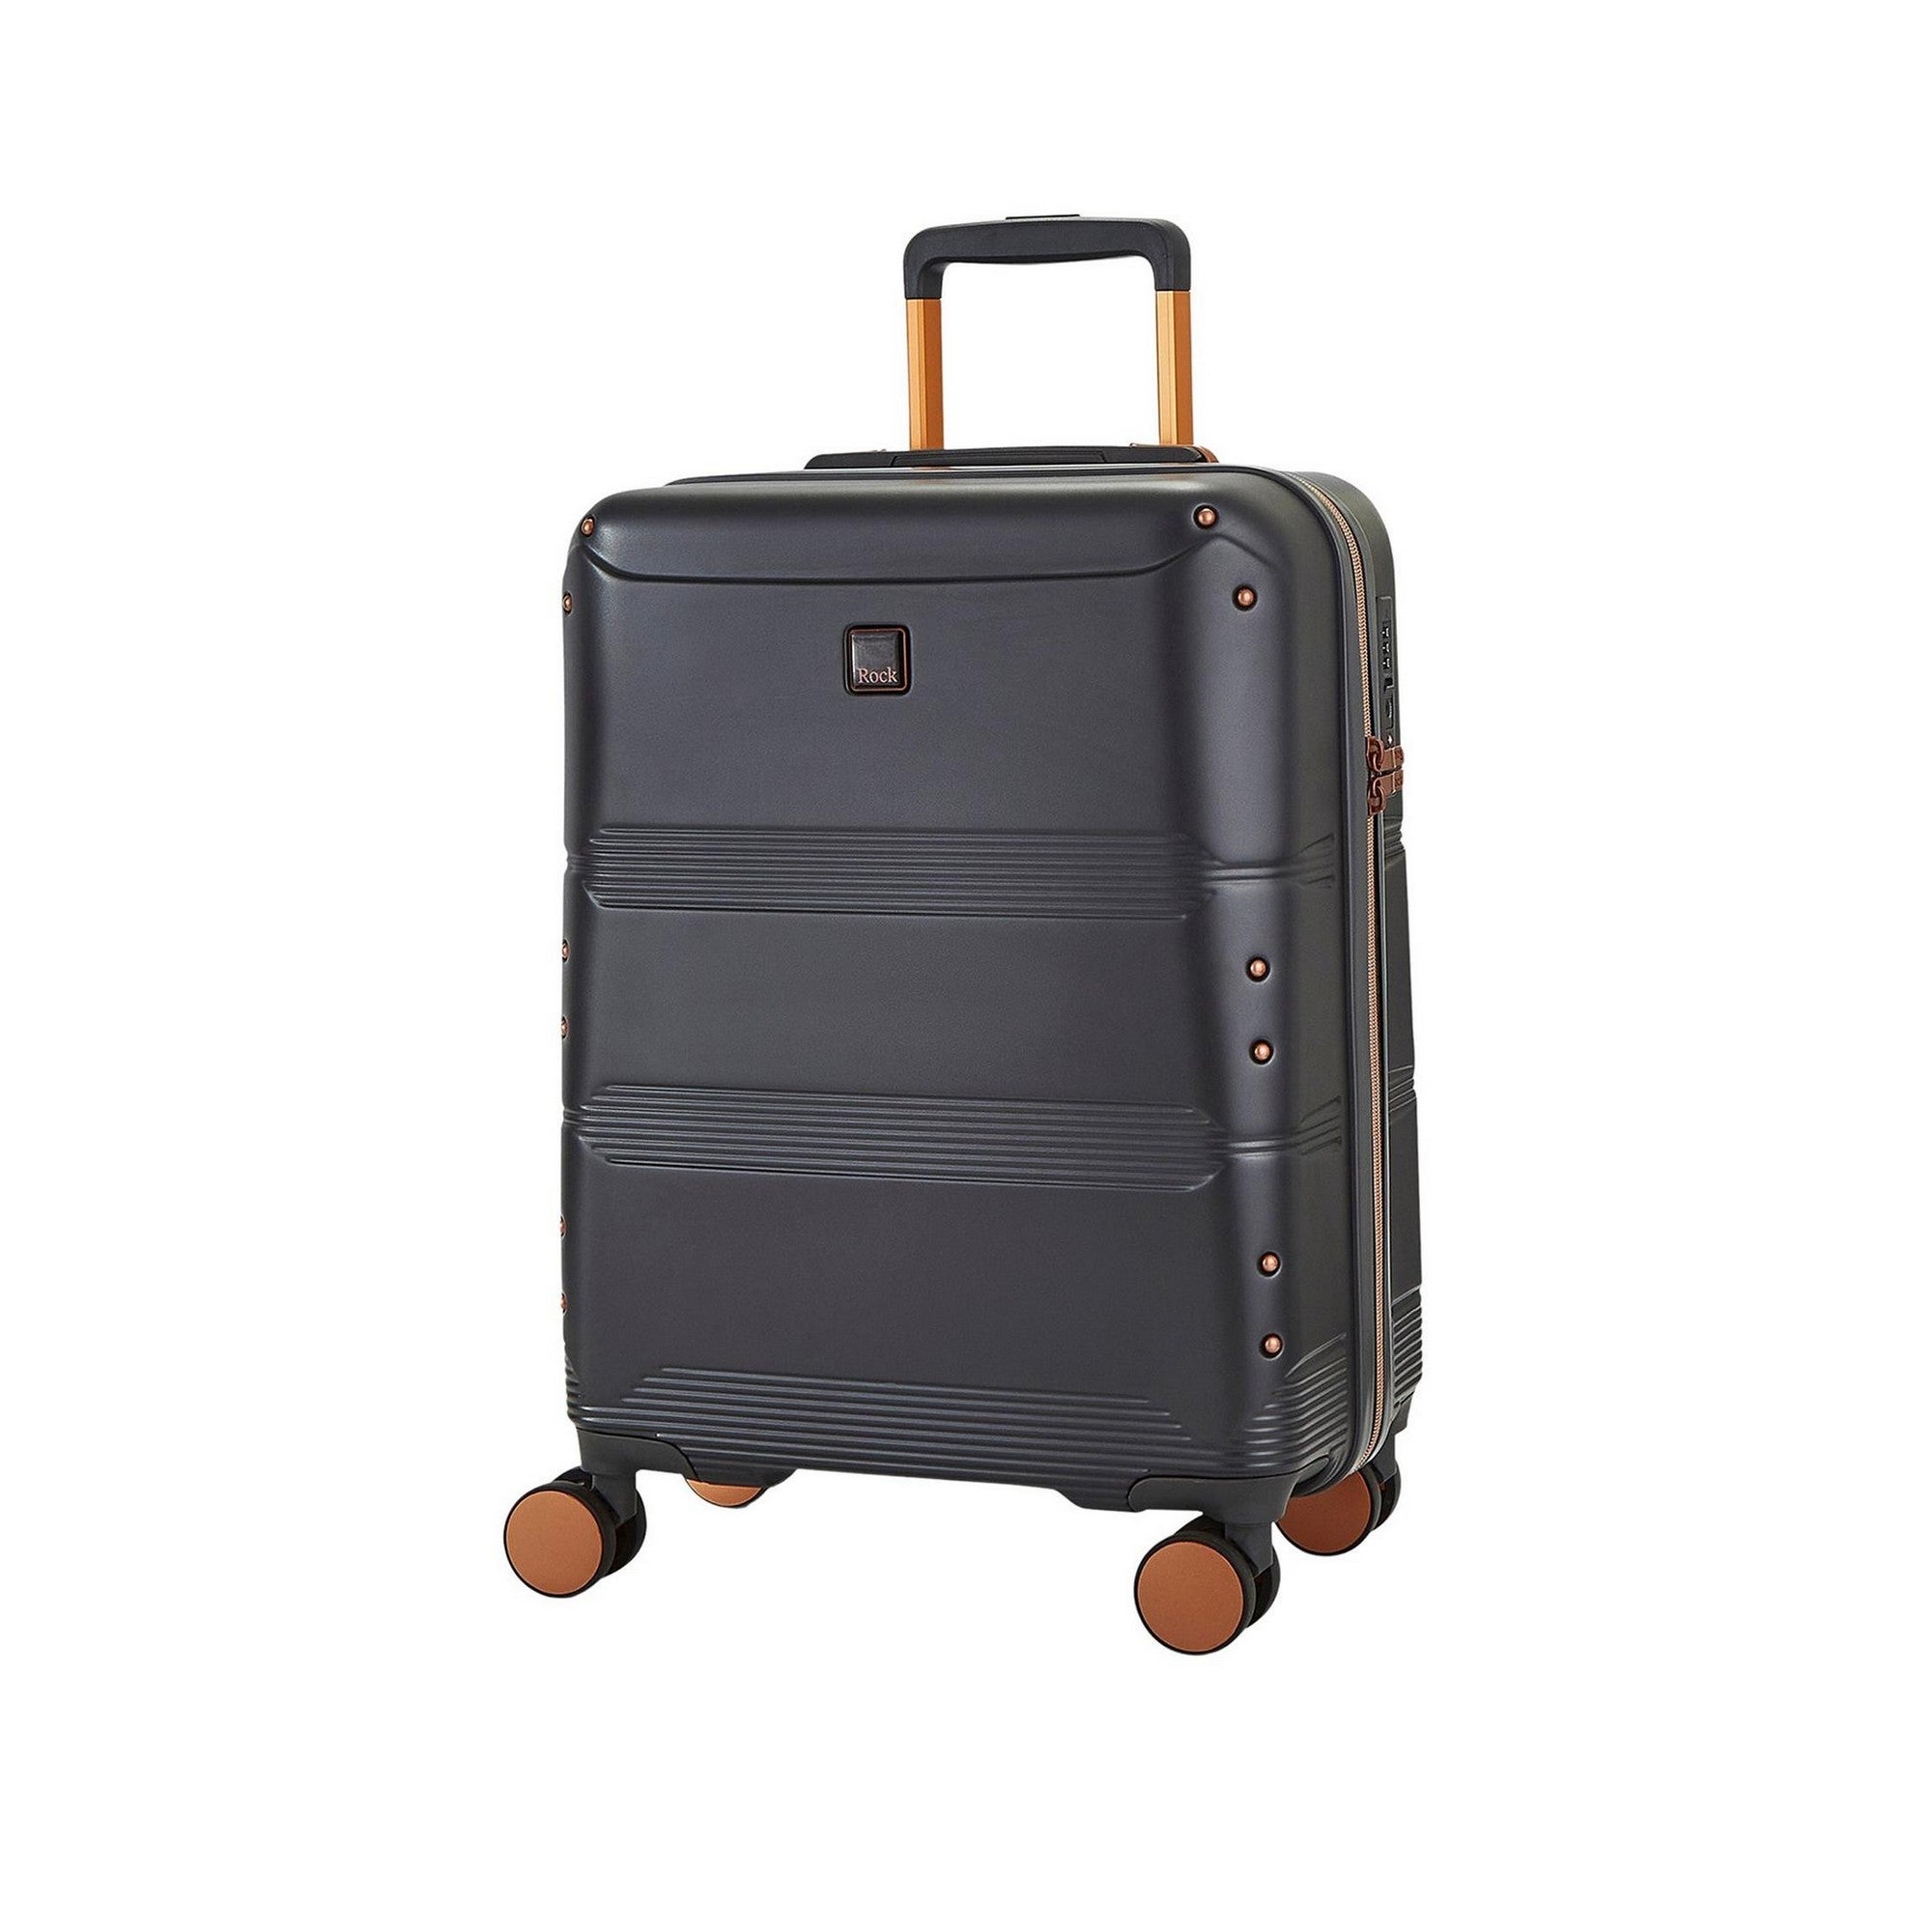 Rock Luggage Mayfair Suitcase Charcoal